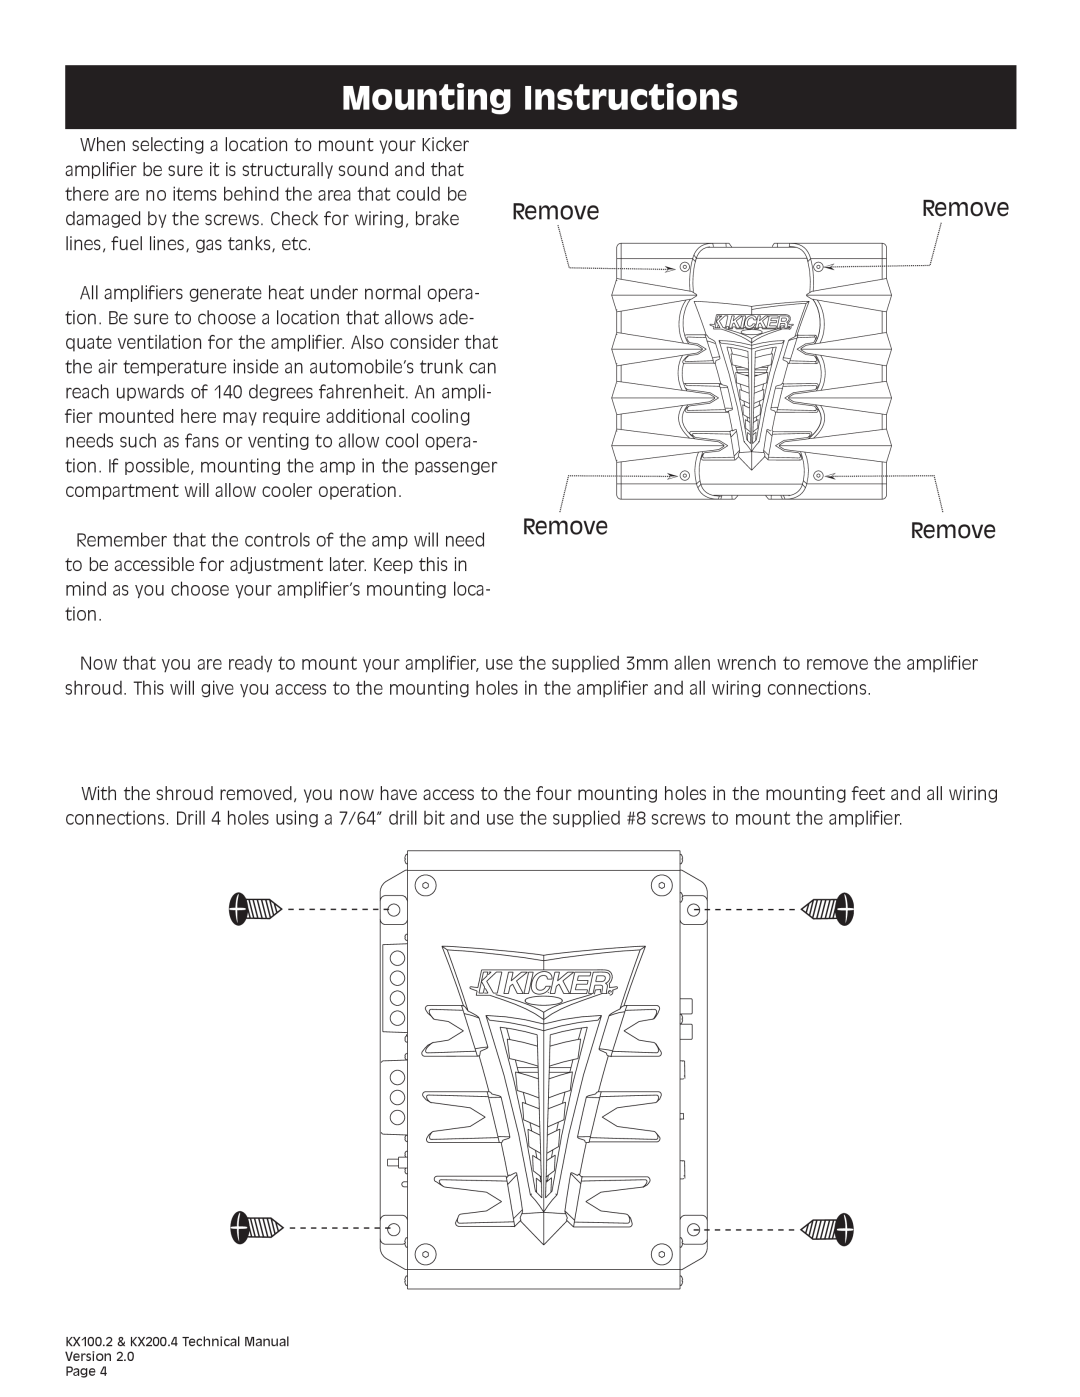 Kicker KX200.4 technical manual Mounting Instructions, Remove Remove 